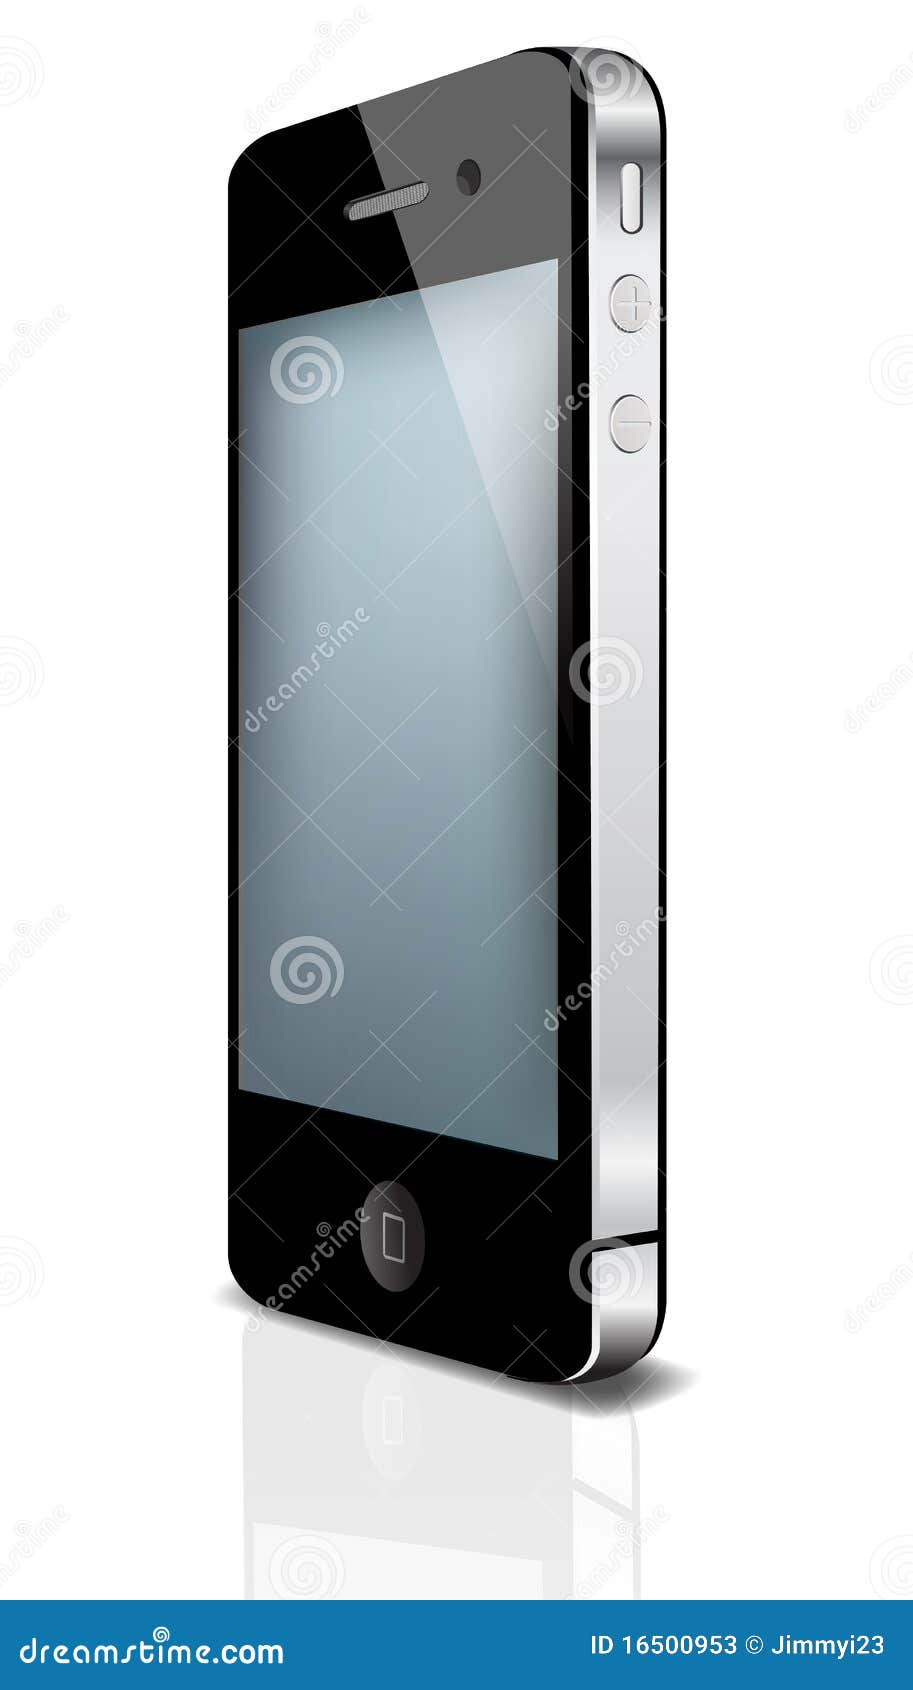 Mobile device editorial stock photo. Illustration of glossy - 16500953